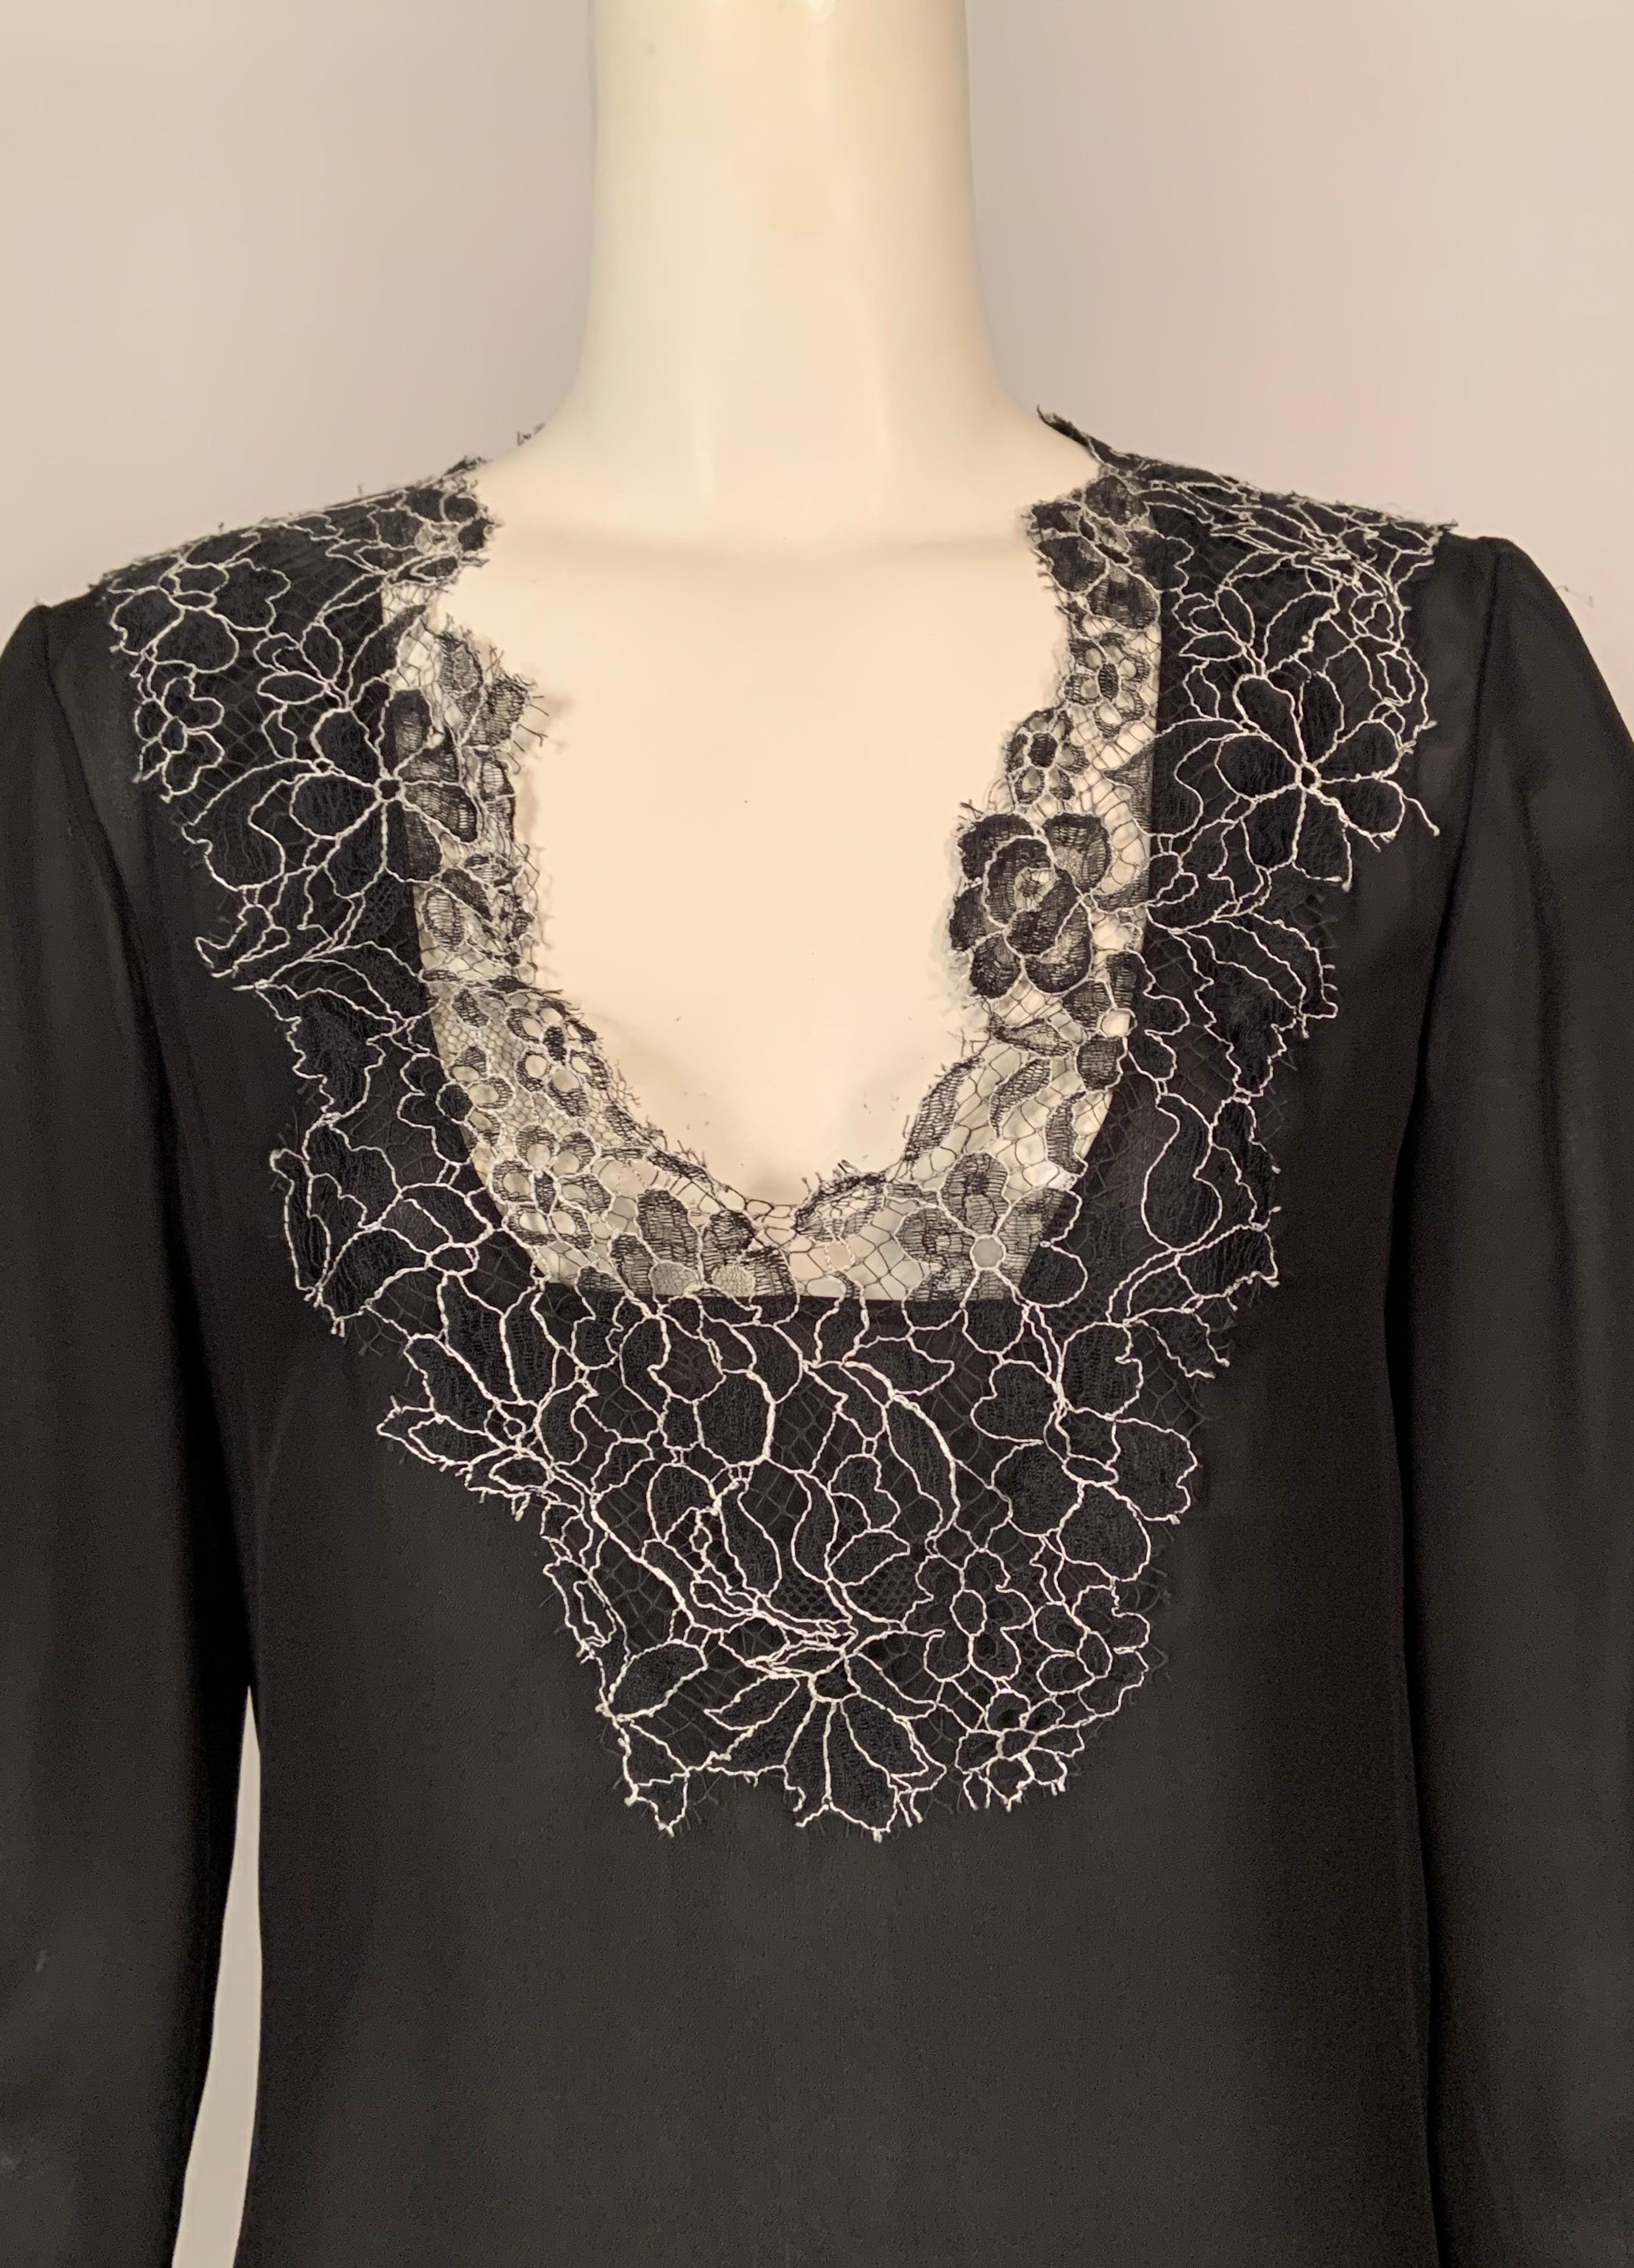 Two layers of semi sheer black silk chiffon are trimmed with a deep border of black and white floral lace, so delicate it resembles a spider web. The blouse was retailed by Neiman Marcus and still bears the original tags. There is a left side zipper